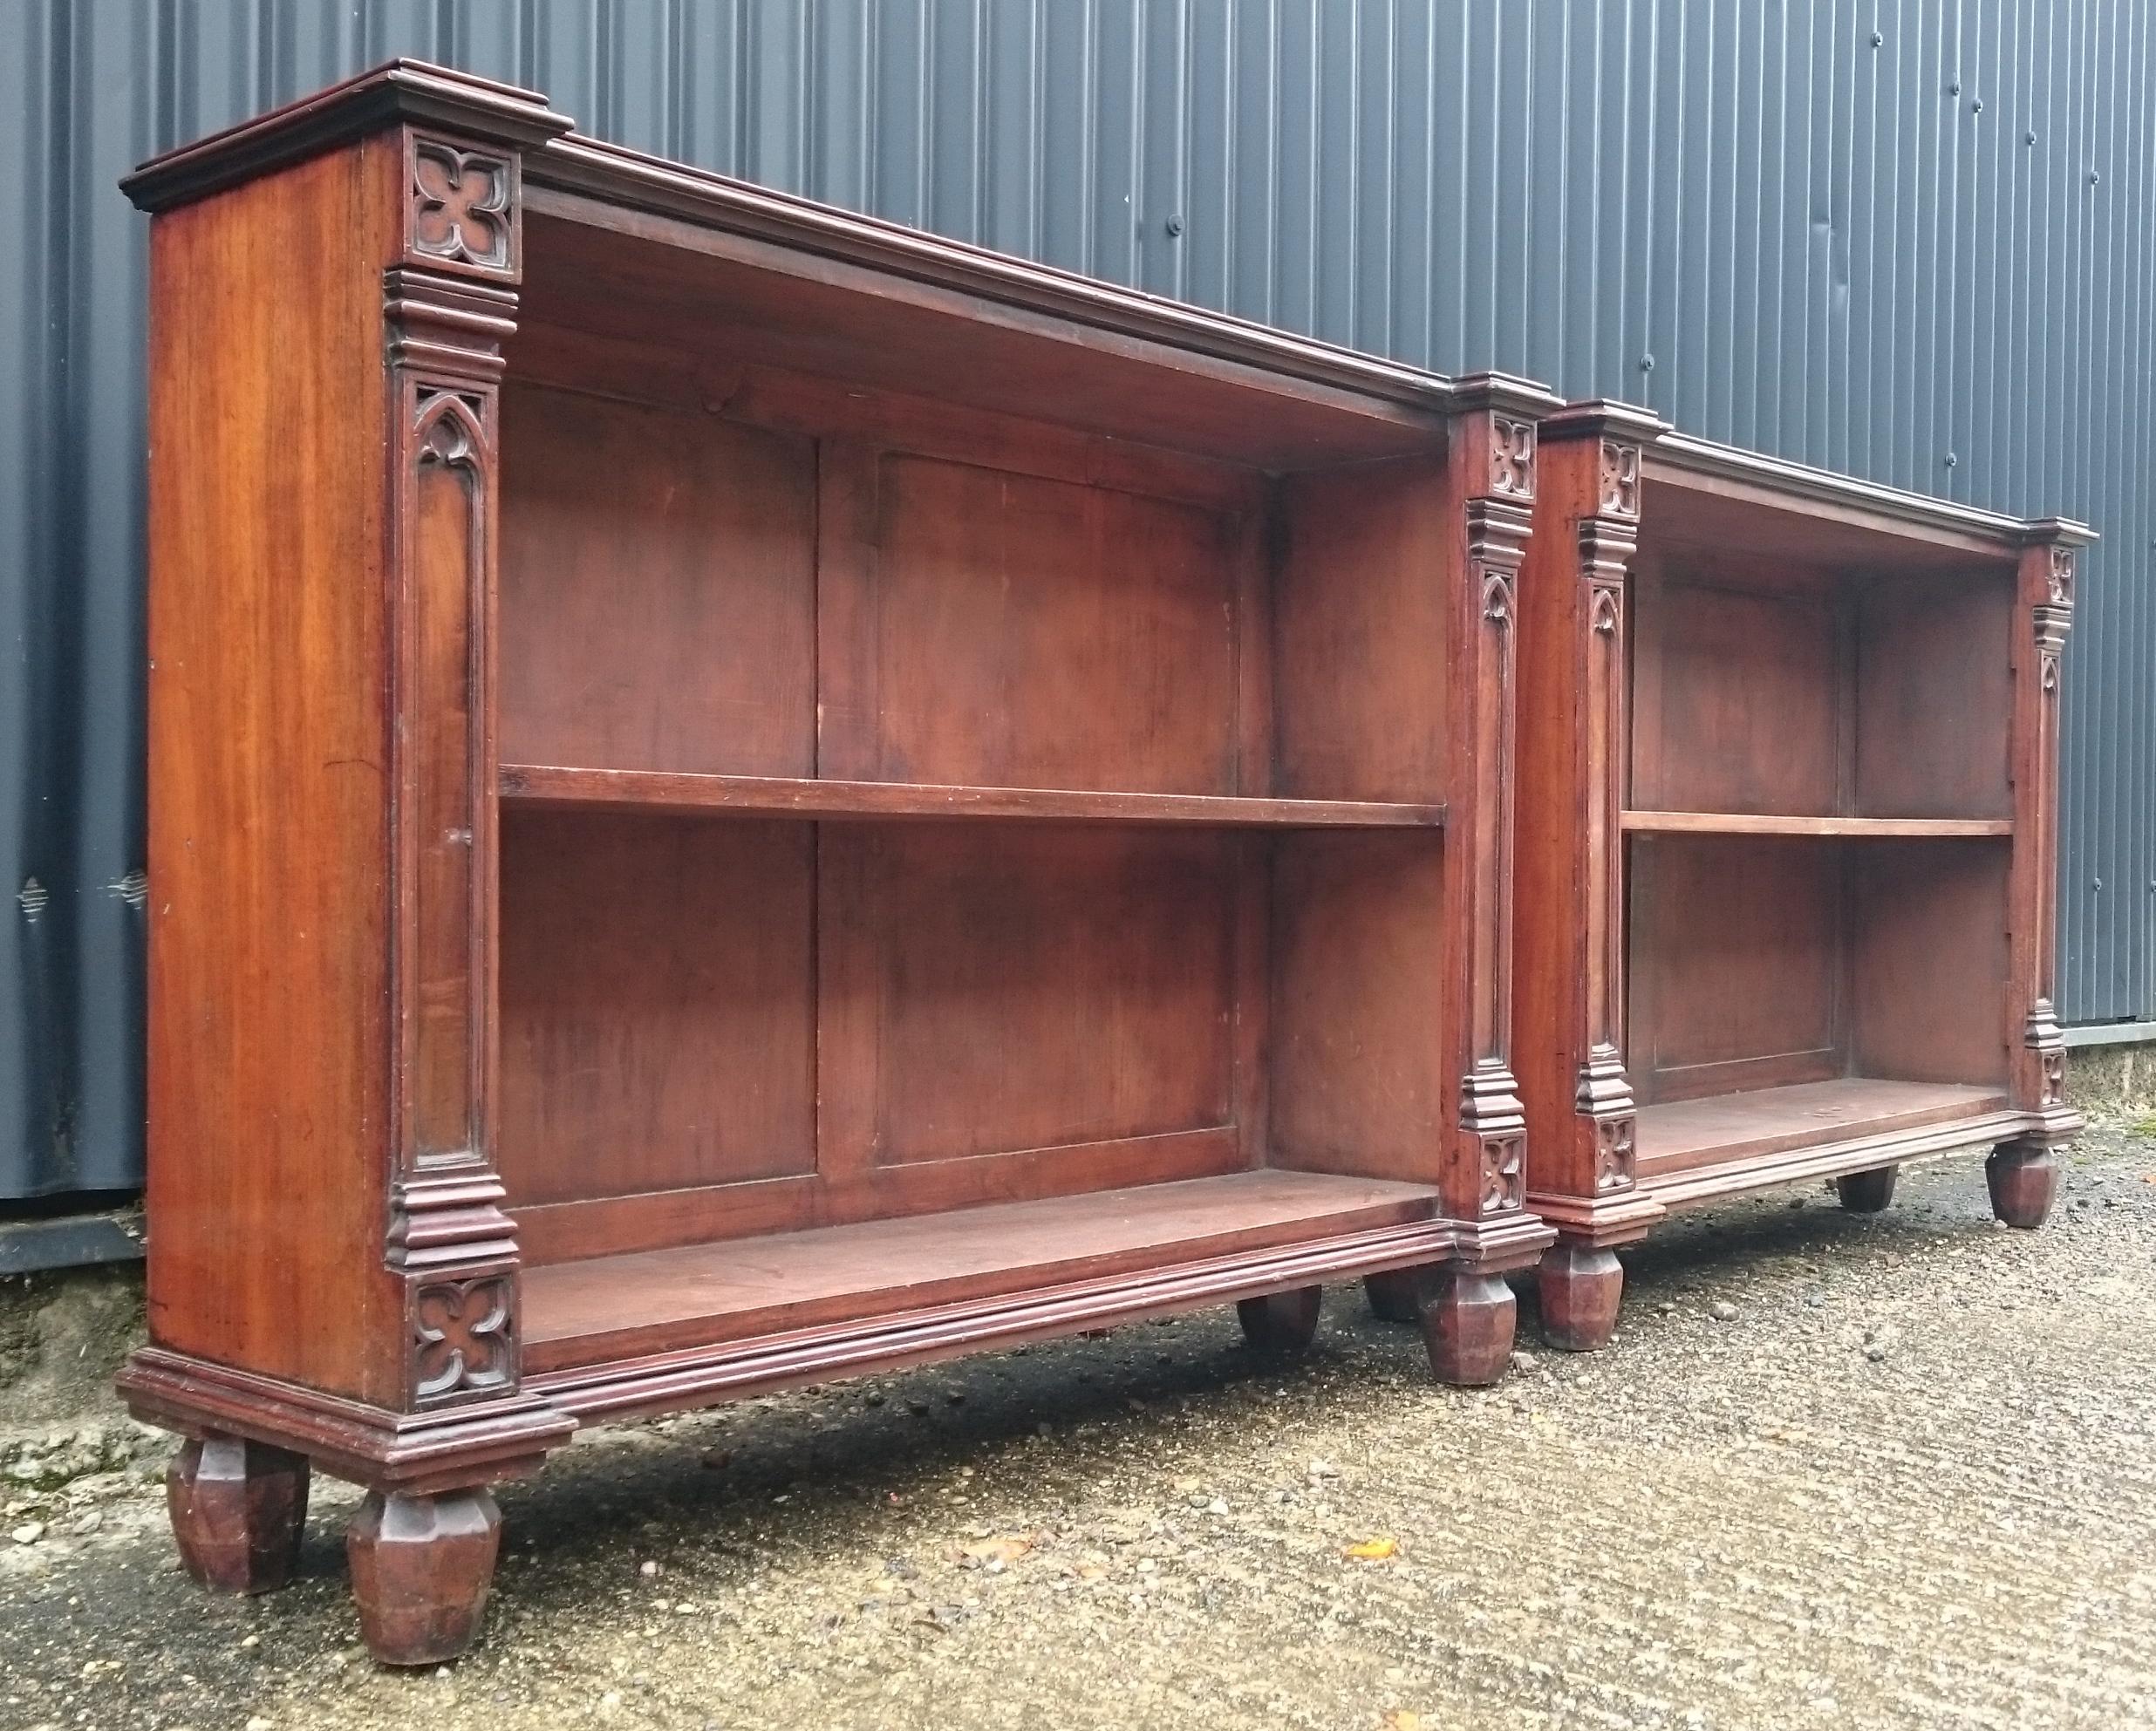 Pair of early 19th century bookcases in the Gothic style. This is a really wonderful pair of bookcases which provide lots of storage while remaining usefully shallow in depth.

English, circa 1825 

Measures: 117 cm / 46